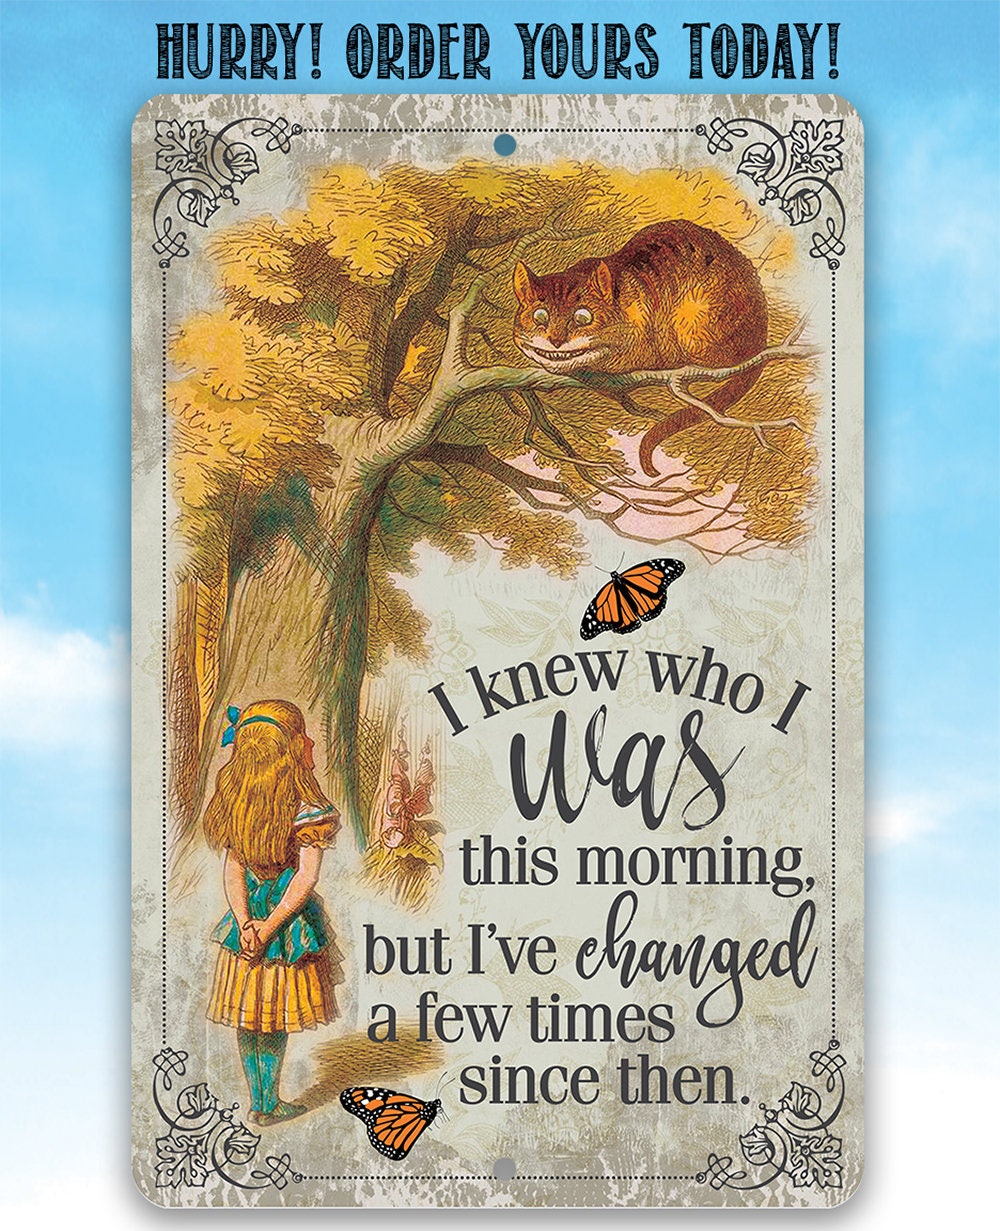 Alice in Wonderland - I Knew Who I Was This Morning - 8" x 12" or 12" x 18" Aluminum Tin Awesome Metal Poster Lone Star Art 